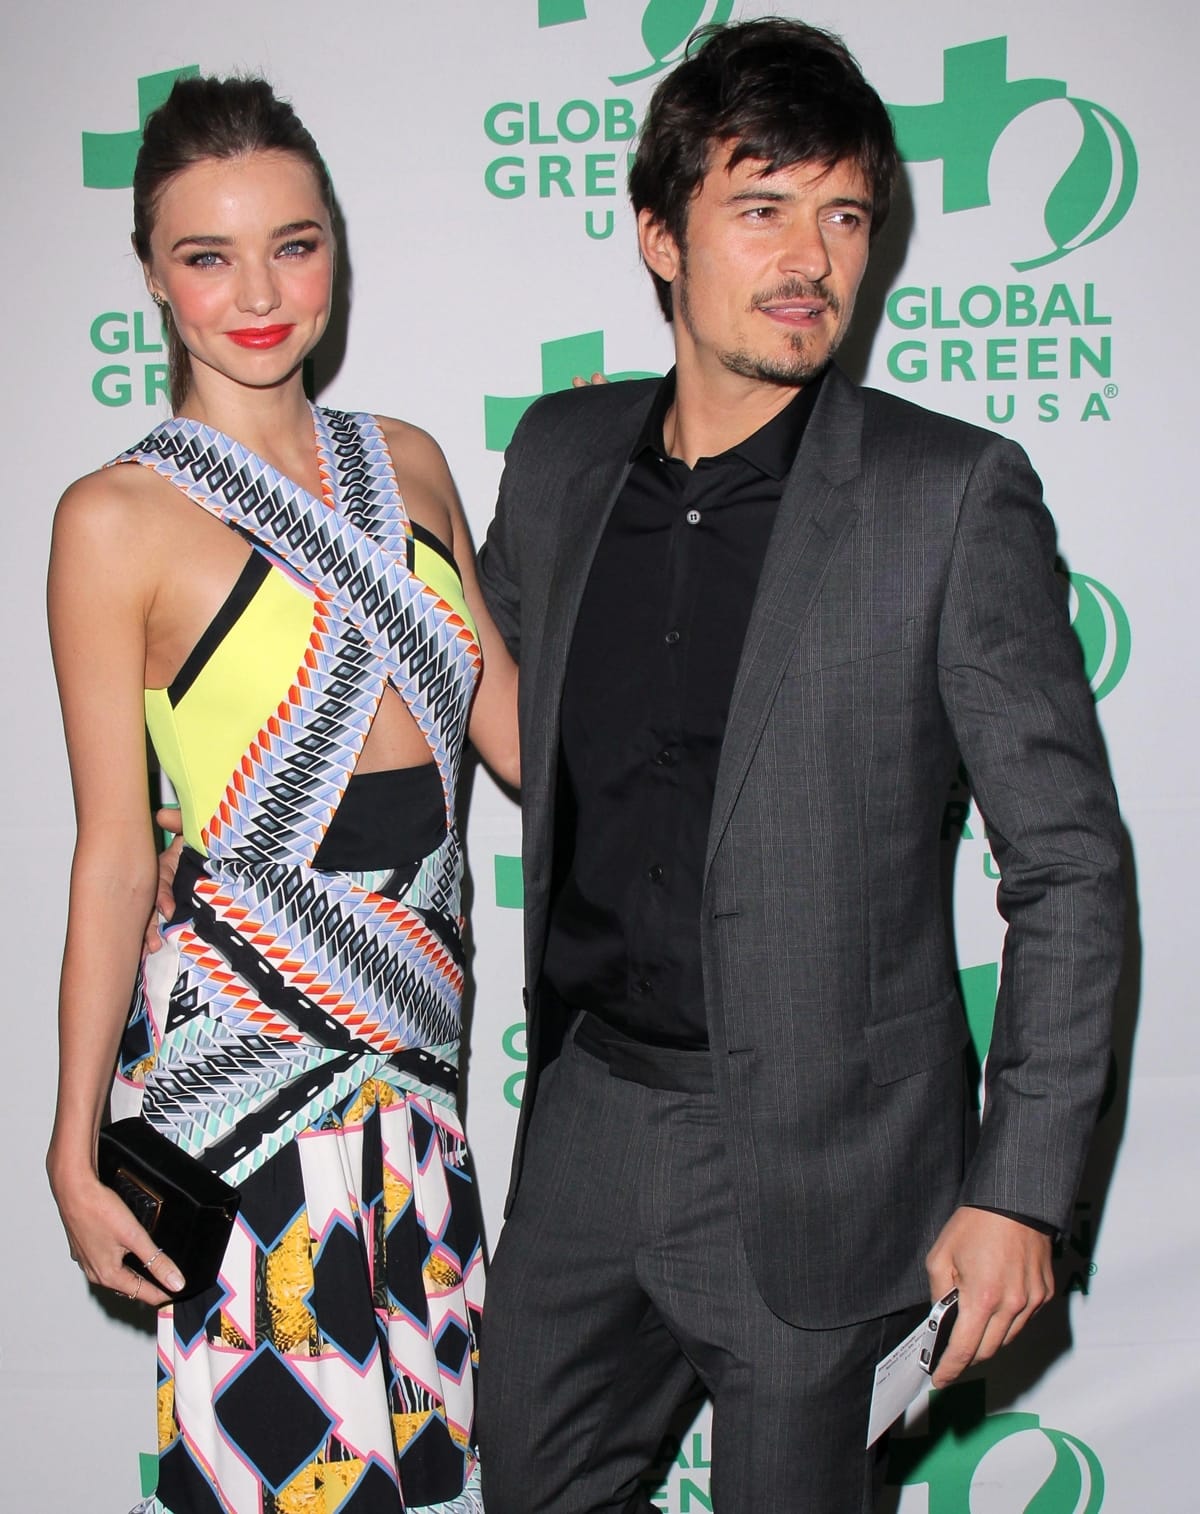 Miranda Kerr and Orlando Bloom got engaged in 2010 and married later the same year